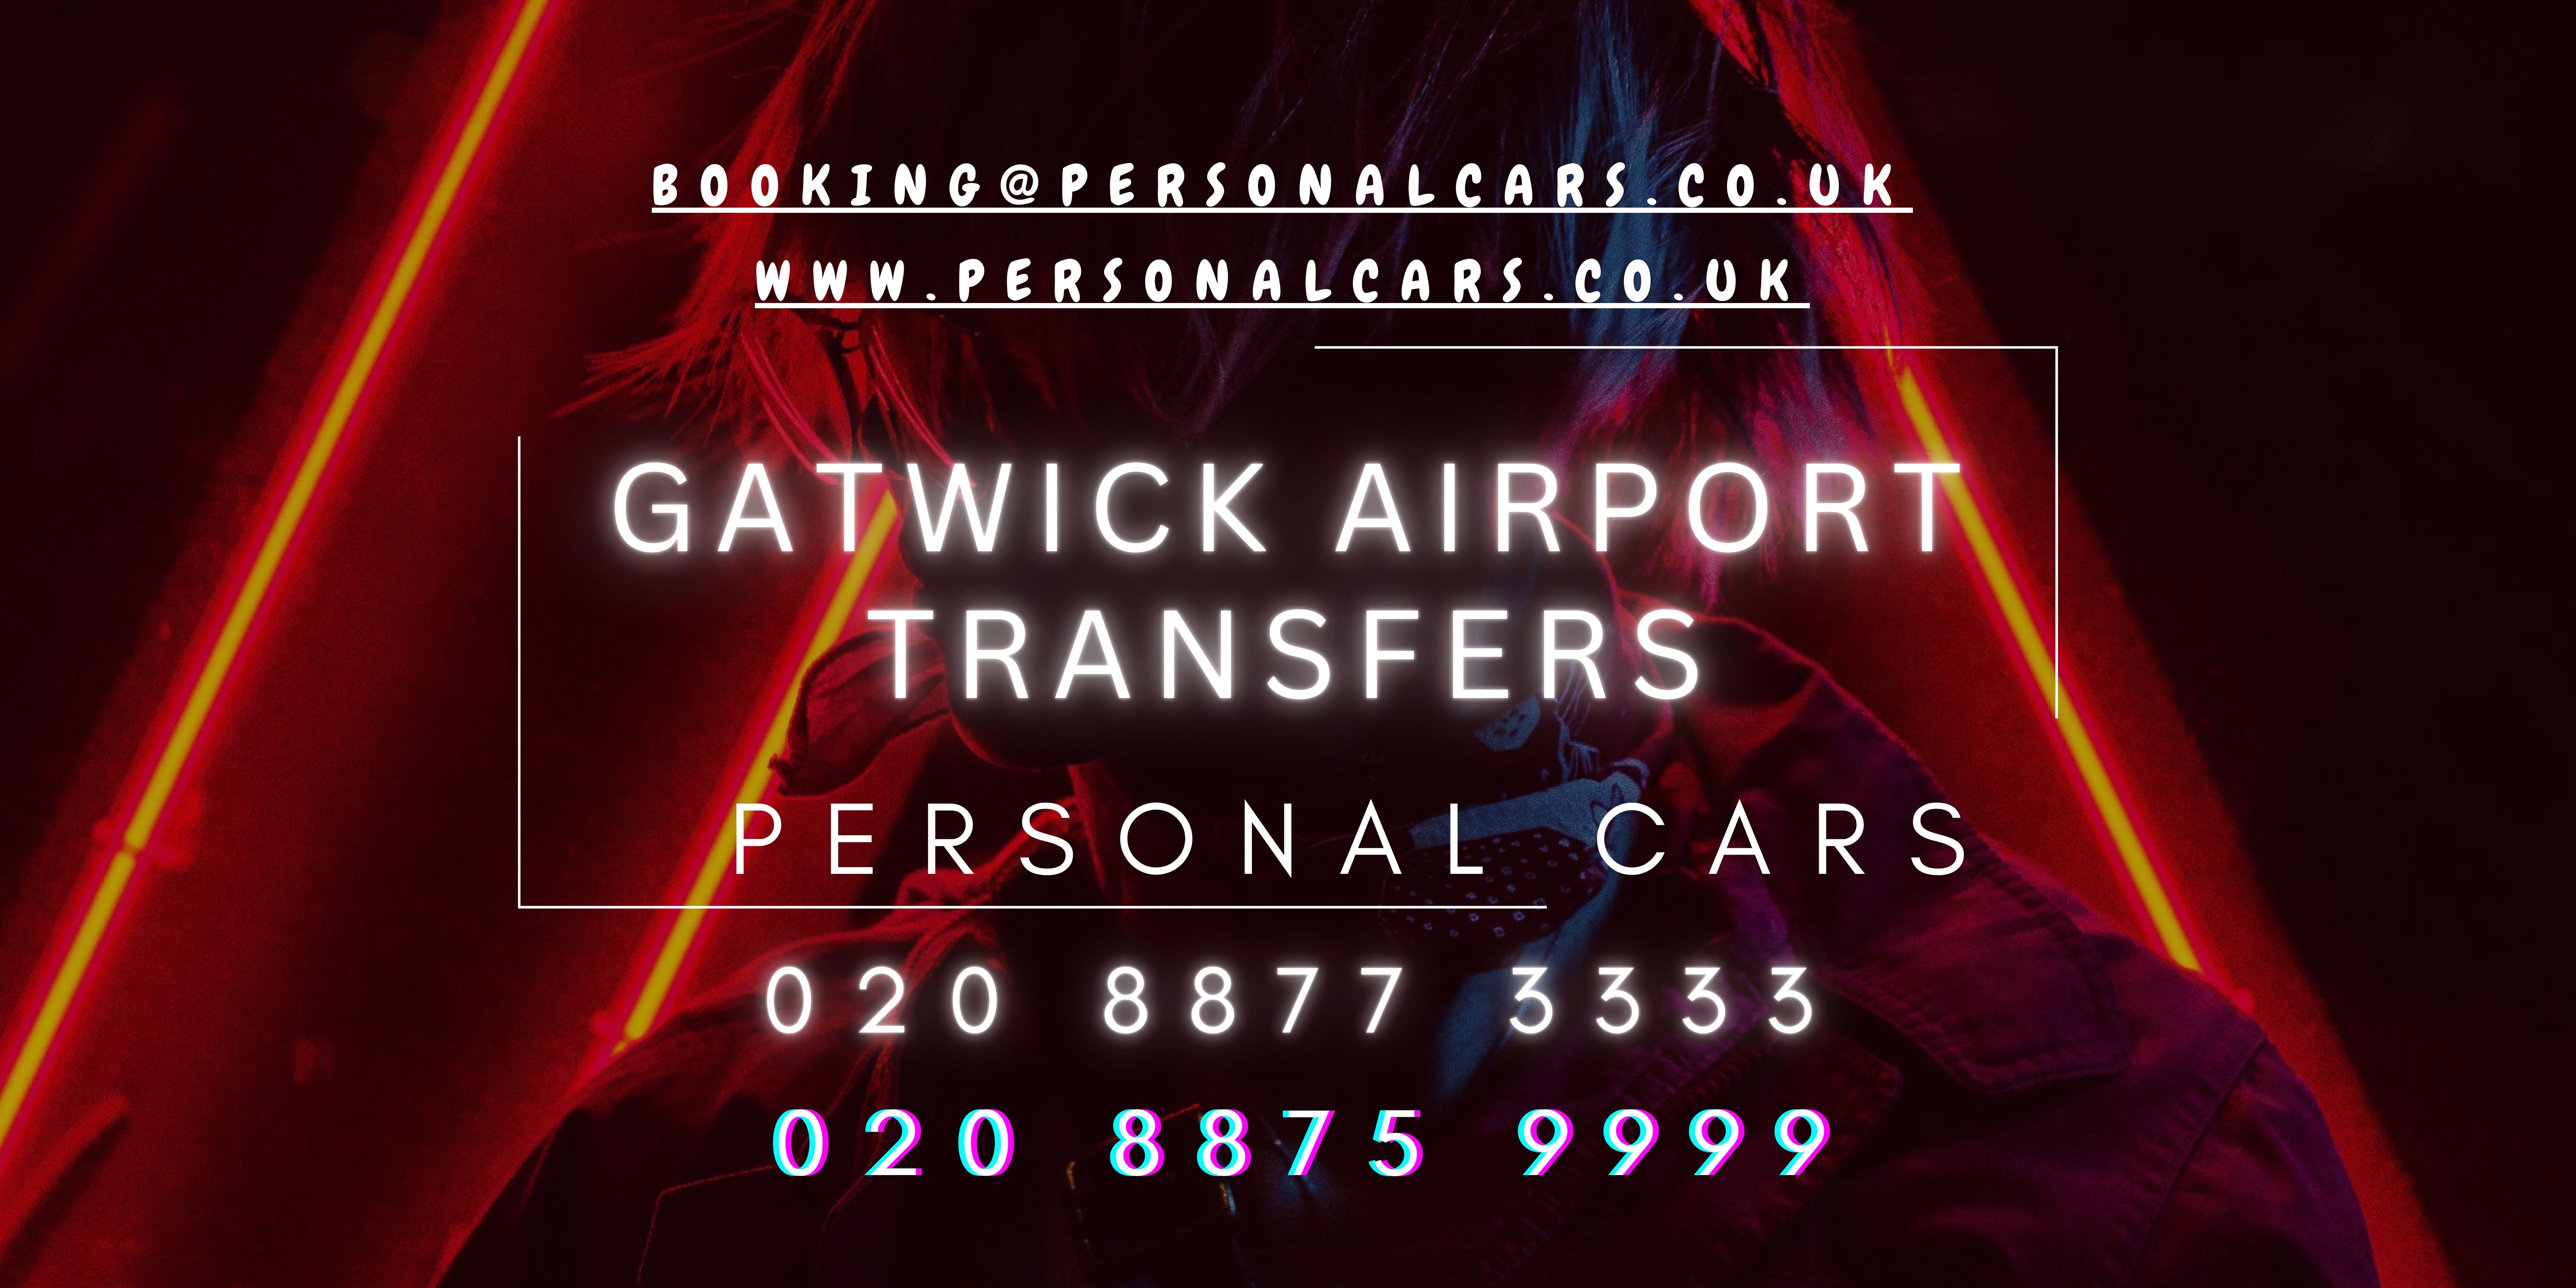 Gatwick taxi service, Late night pick up, early morning drop off, reliable and ontime taxi service in wandsworth, Saloon, executive, MPV or 8 and 9 seater are available 